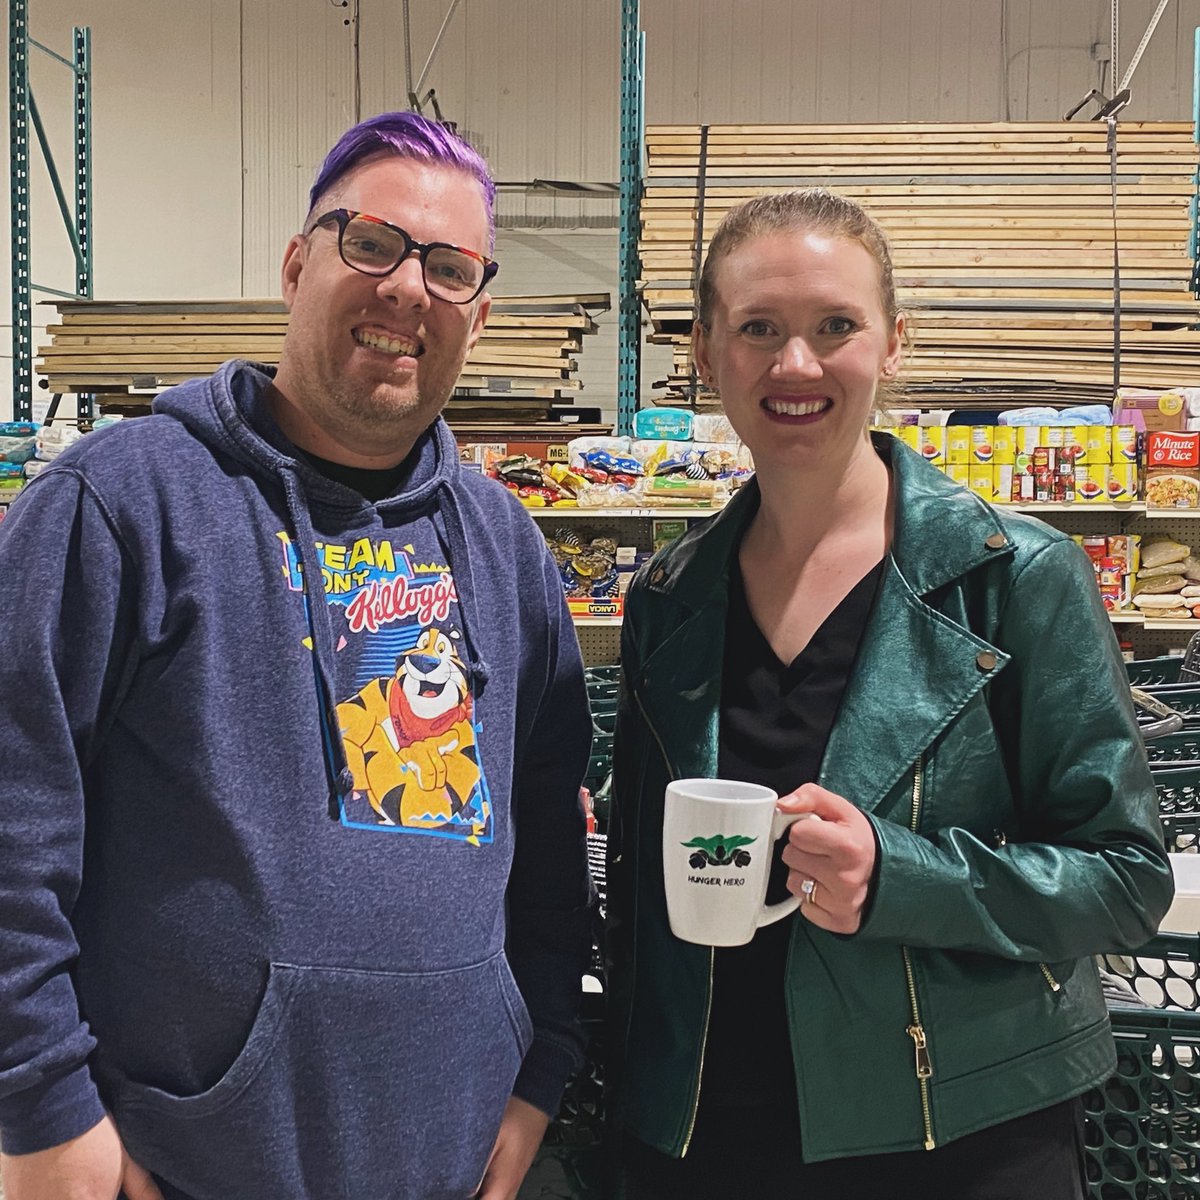 Wonderful to visit with Dan the Executive Director at the Wood Buffalo Food Bank today. They are open and were busy packing hampers and serving clients. Him and his entire team are such a huge asset for our region. I was happy to join their Hunger Hero Monthly Donor program today